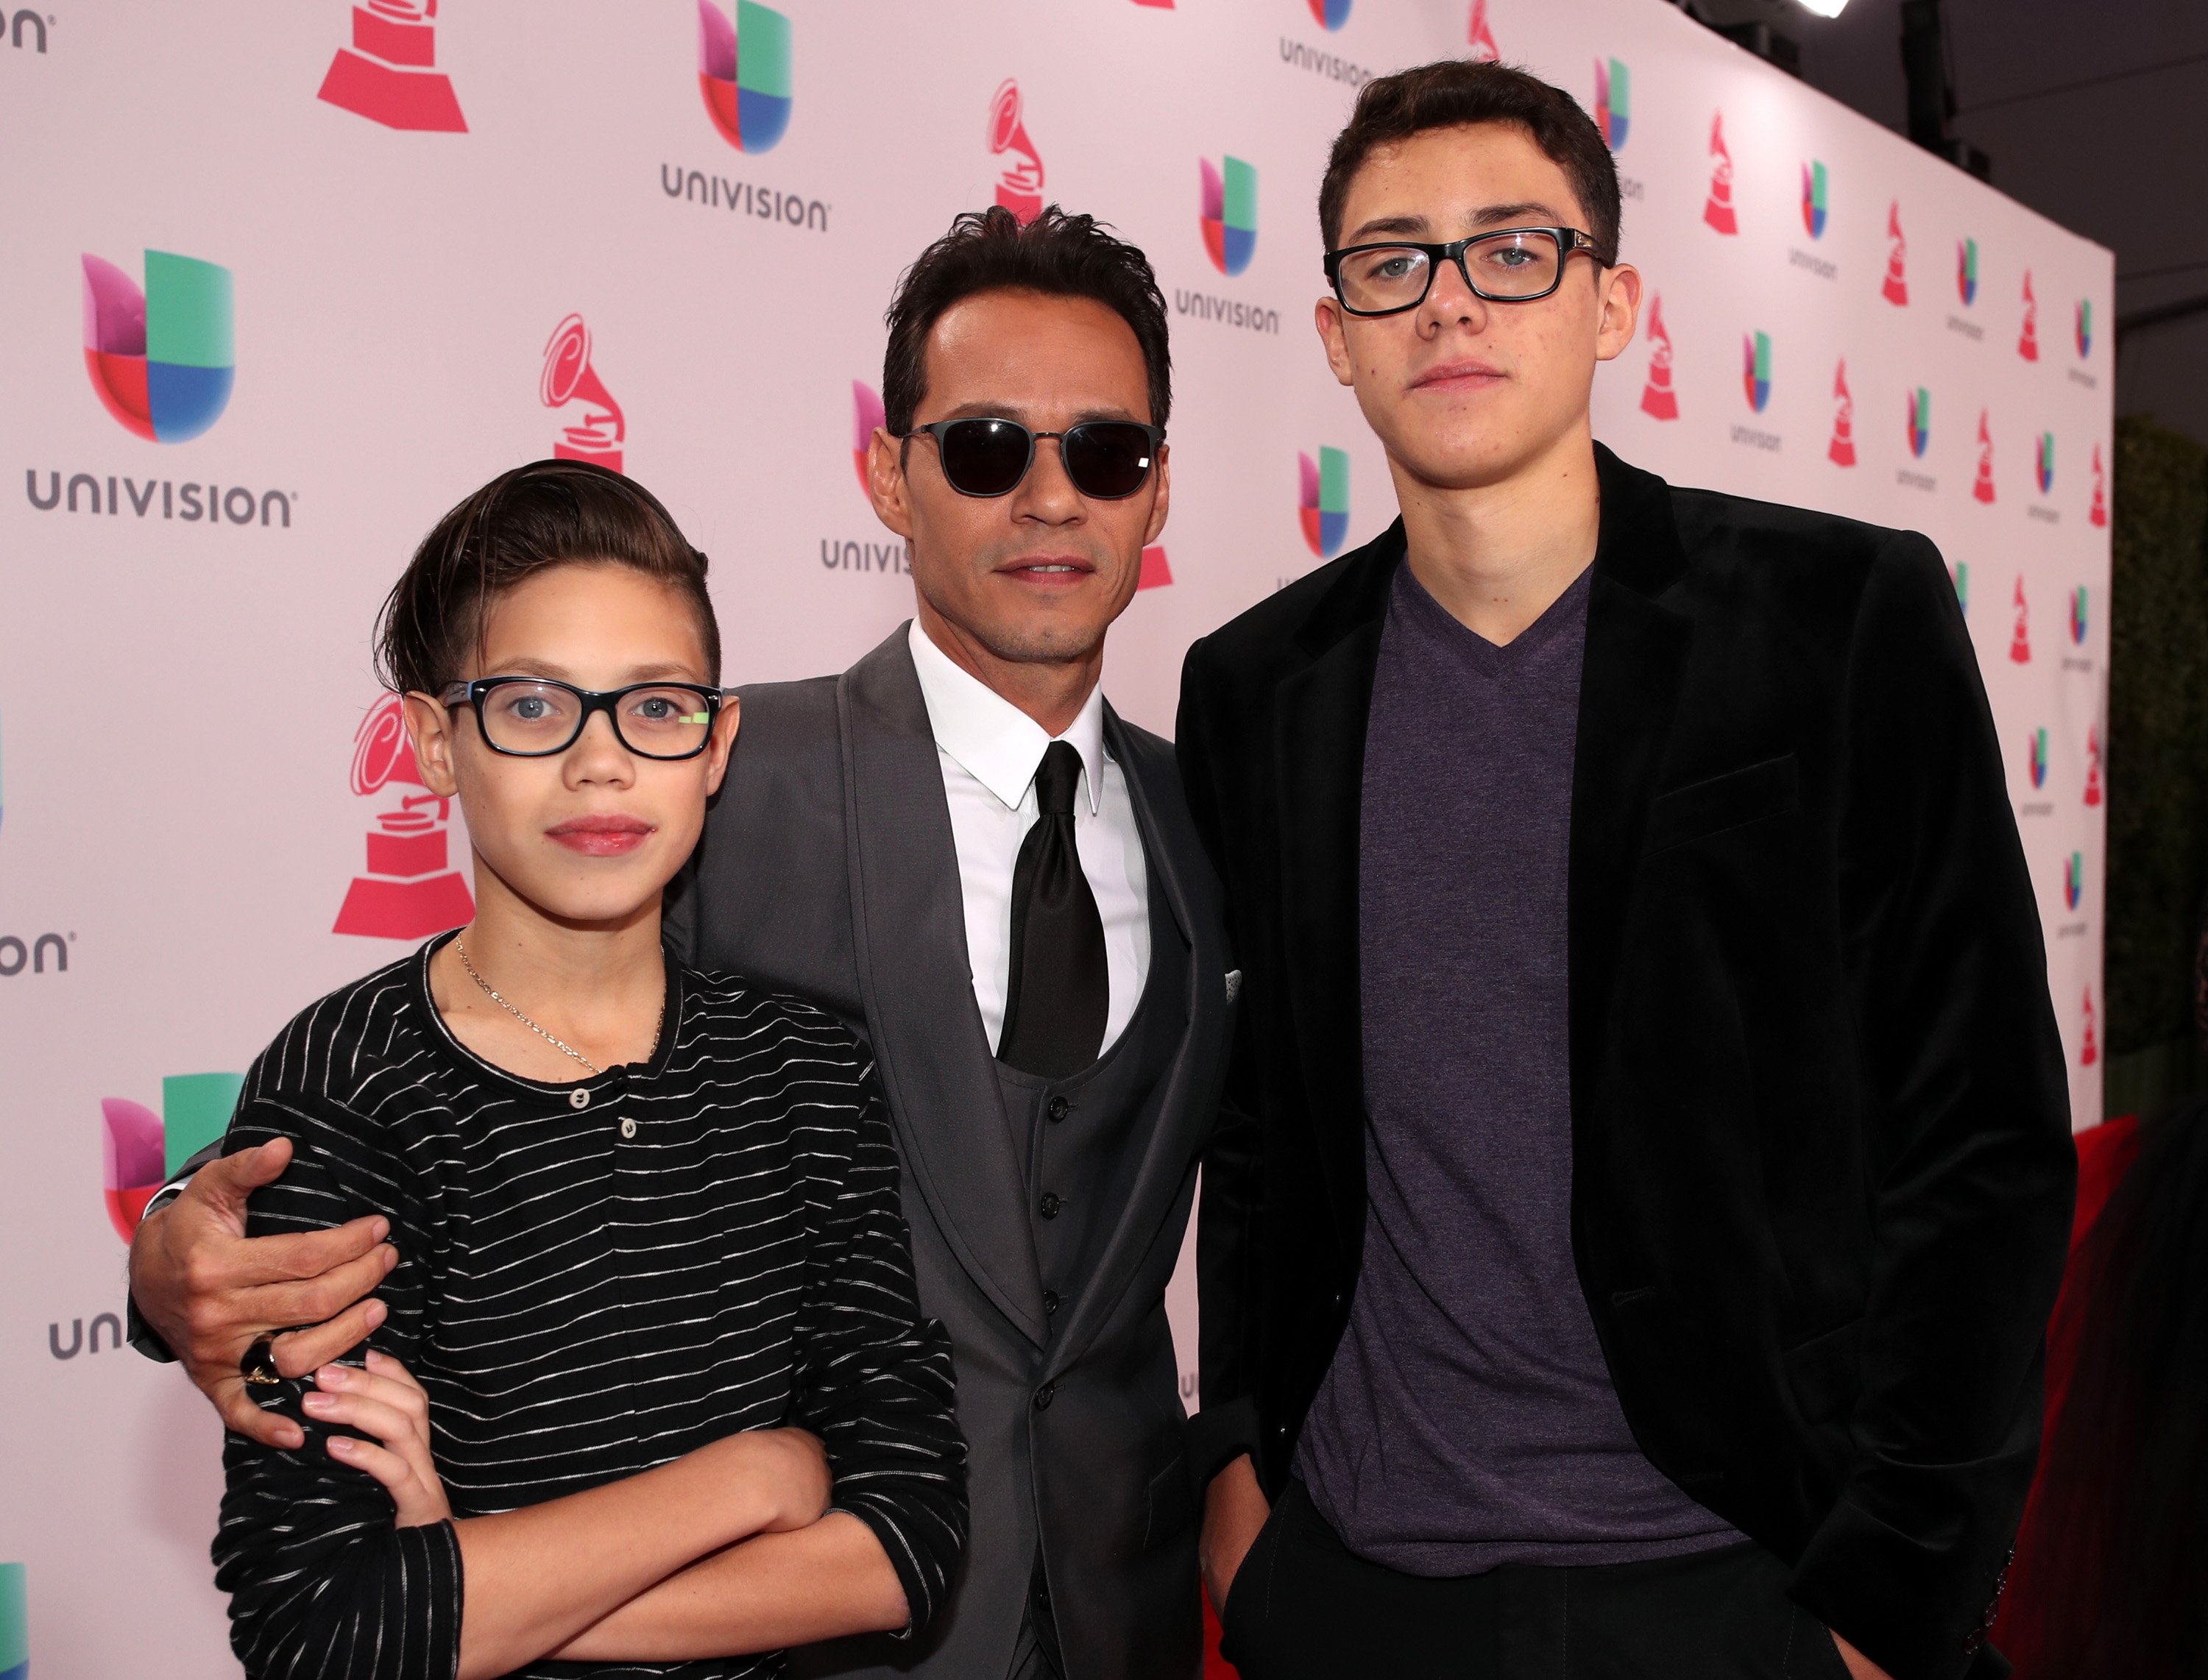 Marc Anthony, Ryan Adrian Muniz, and Cristian Marcus Muniz at T-Mobile Arena on November 17, 2016, in Las Vegas, Nevada. | Source: Getty Images